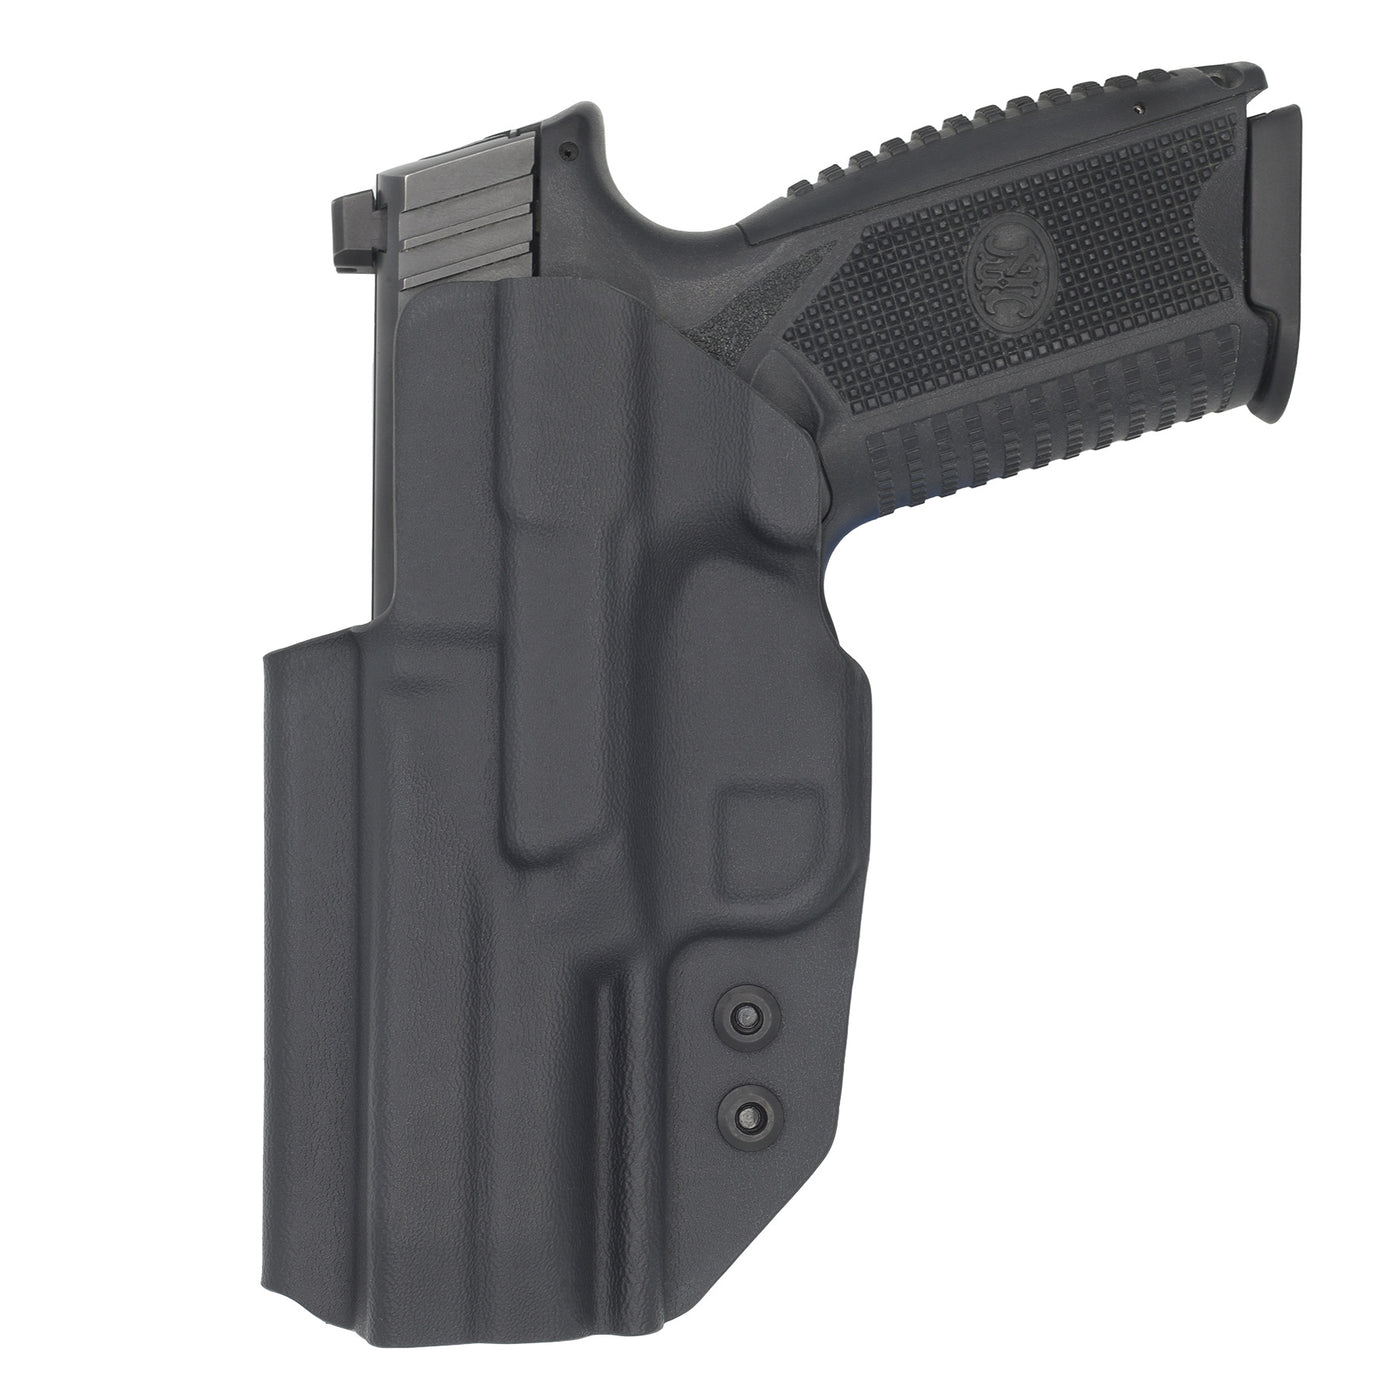 FN 509/t Tactual IWB holster from the backside showing the branded belt clip. This shows the FN509/t in the holstered position.